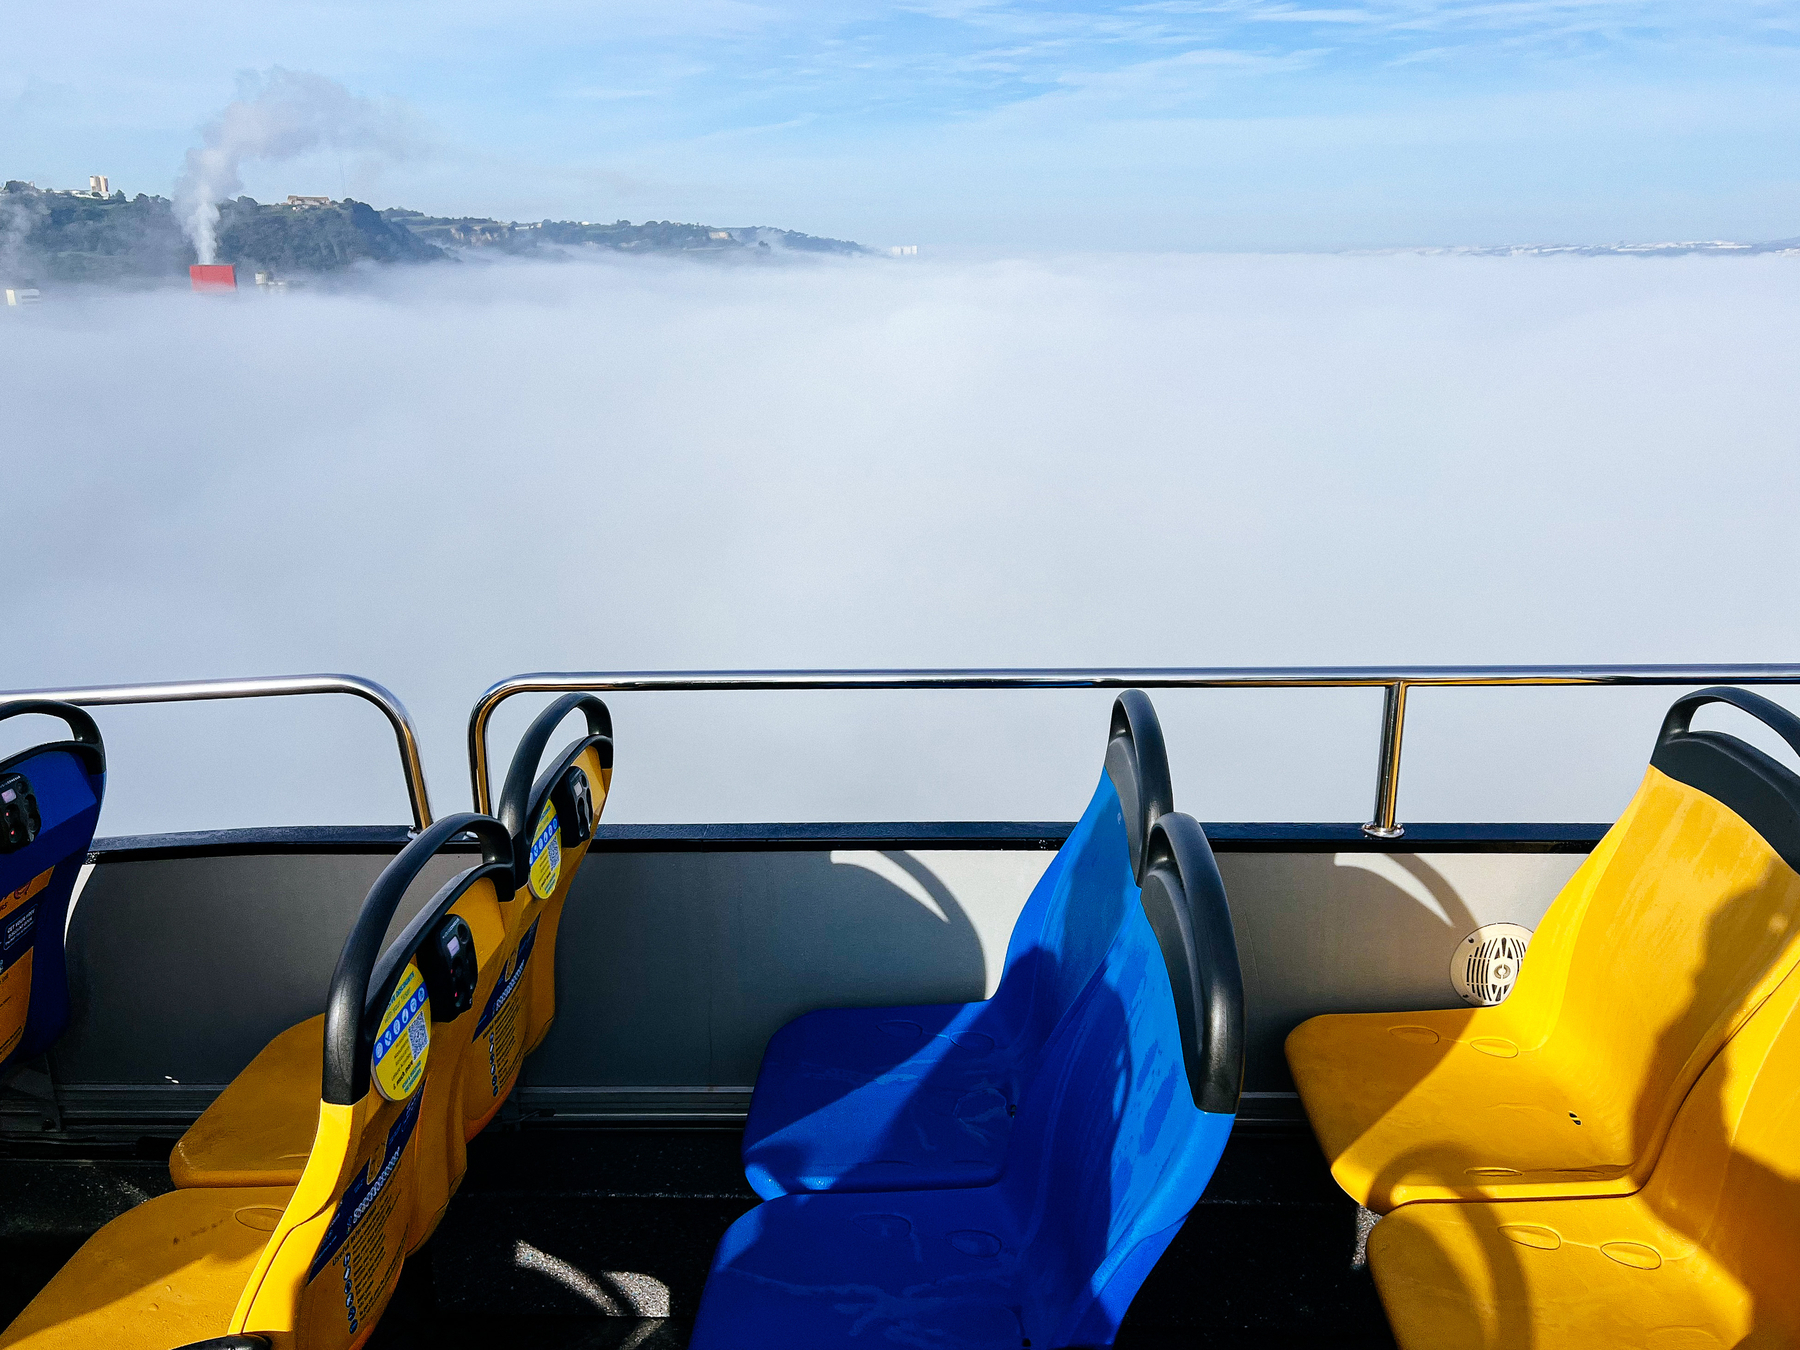 foggy horizon, as seen from a moving bus. Yellow and blue seats visible in the foreground.